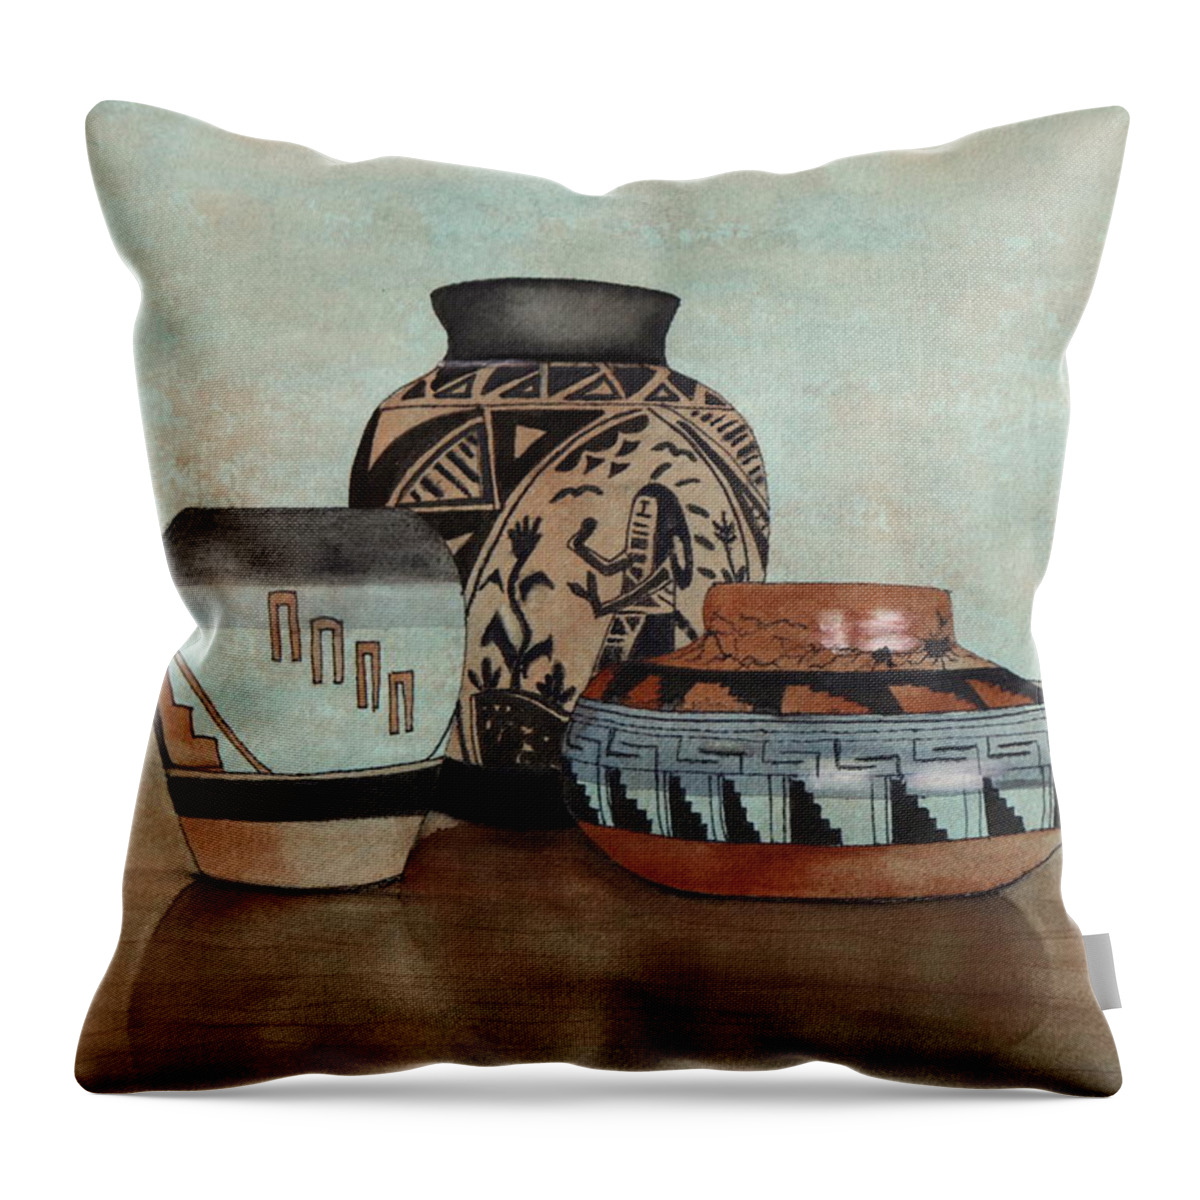 Black Throw Pillow featuring the painting Native Pots 1 Watercolor by Kimberly Walker